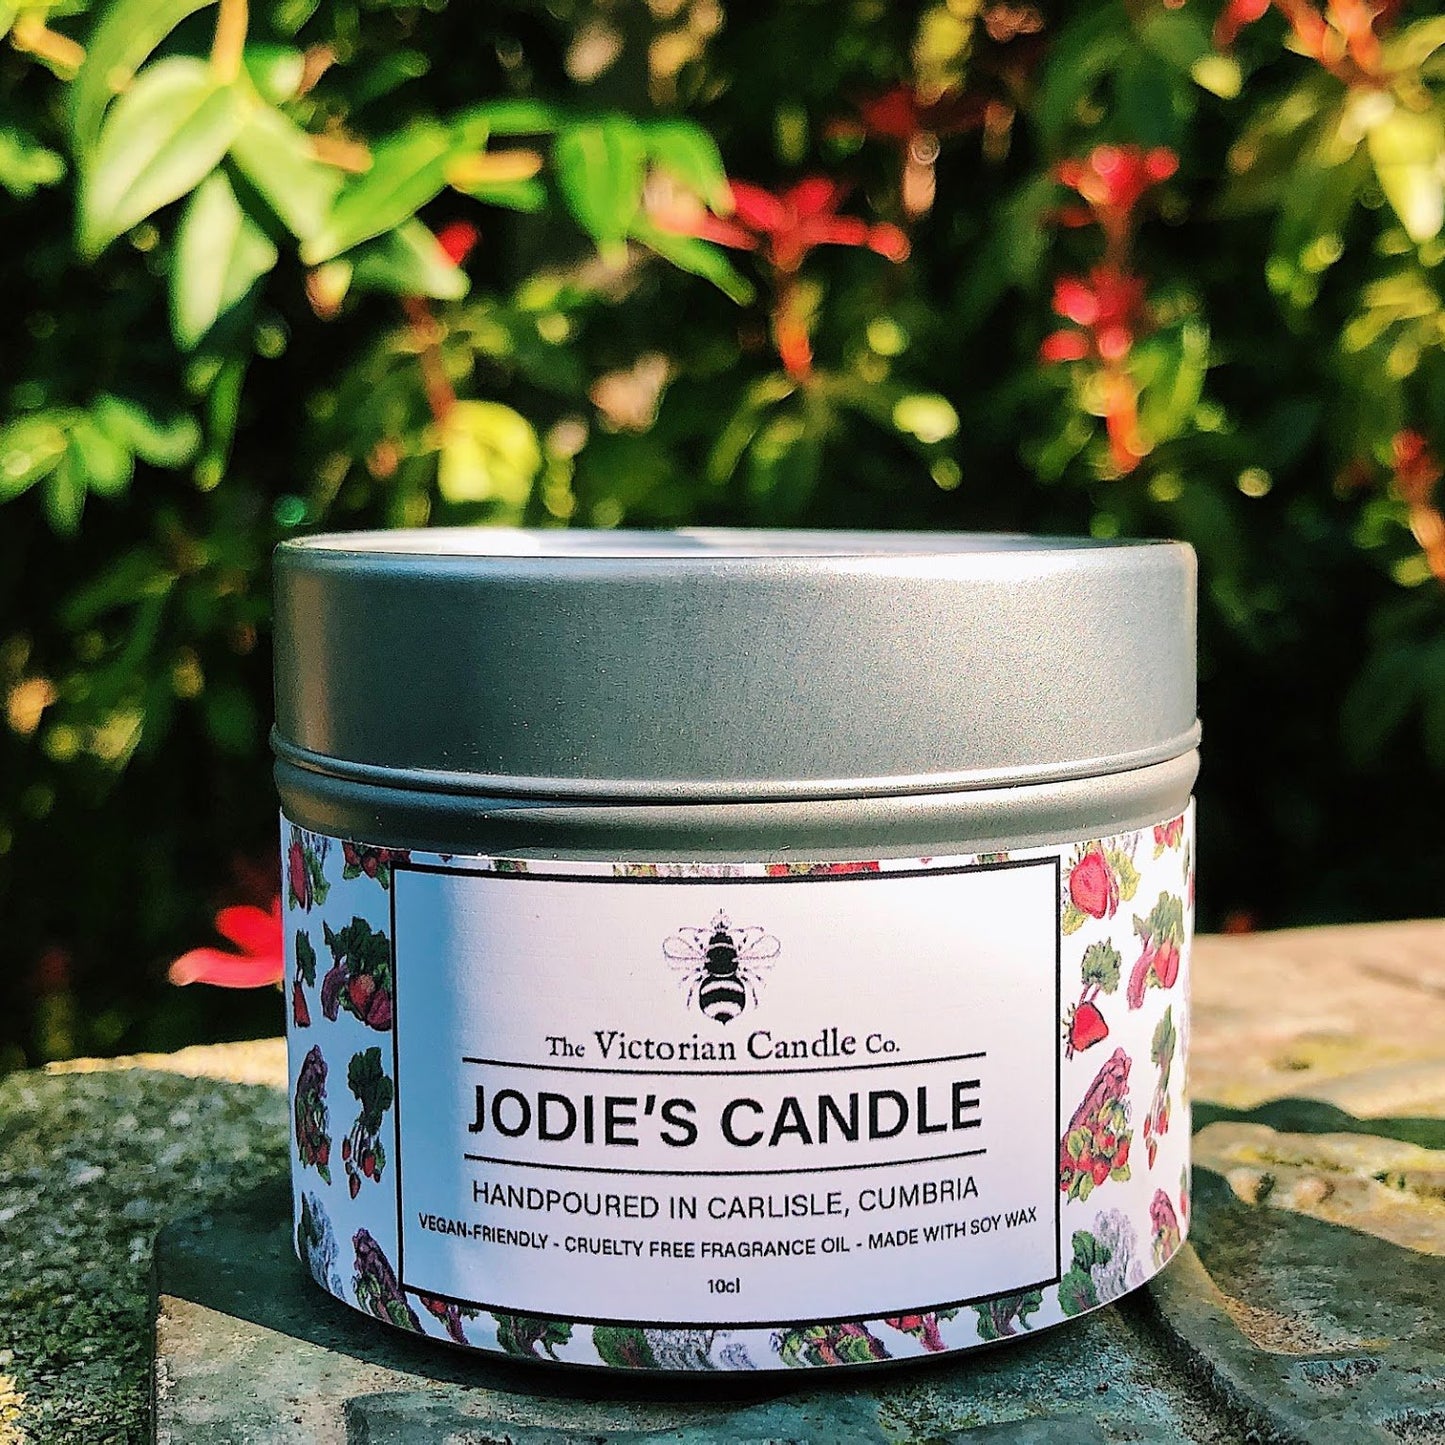 Personalise your own candle!